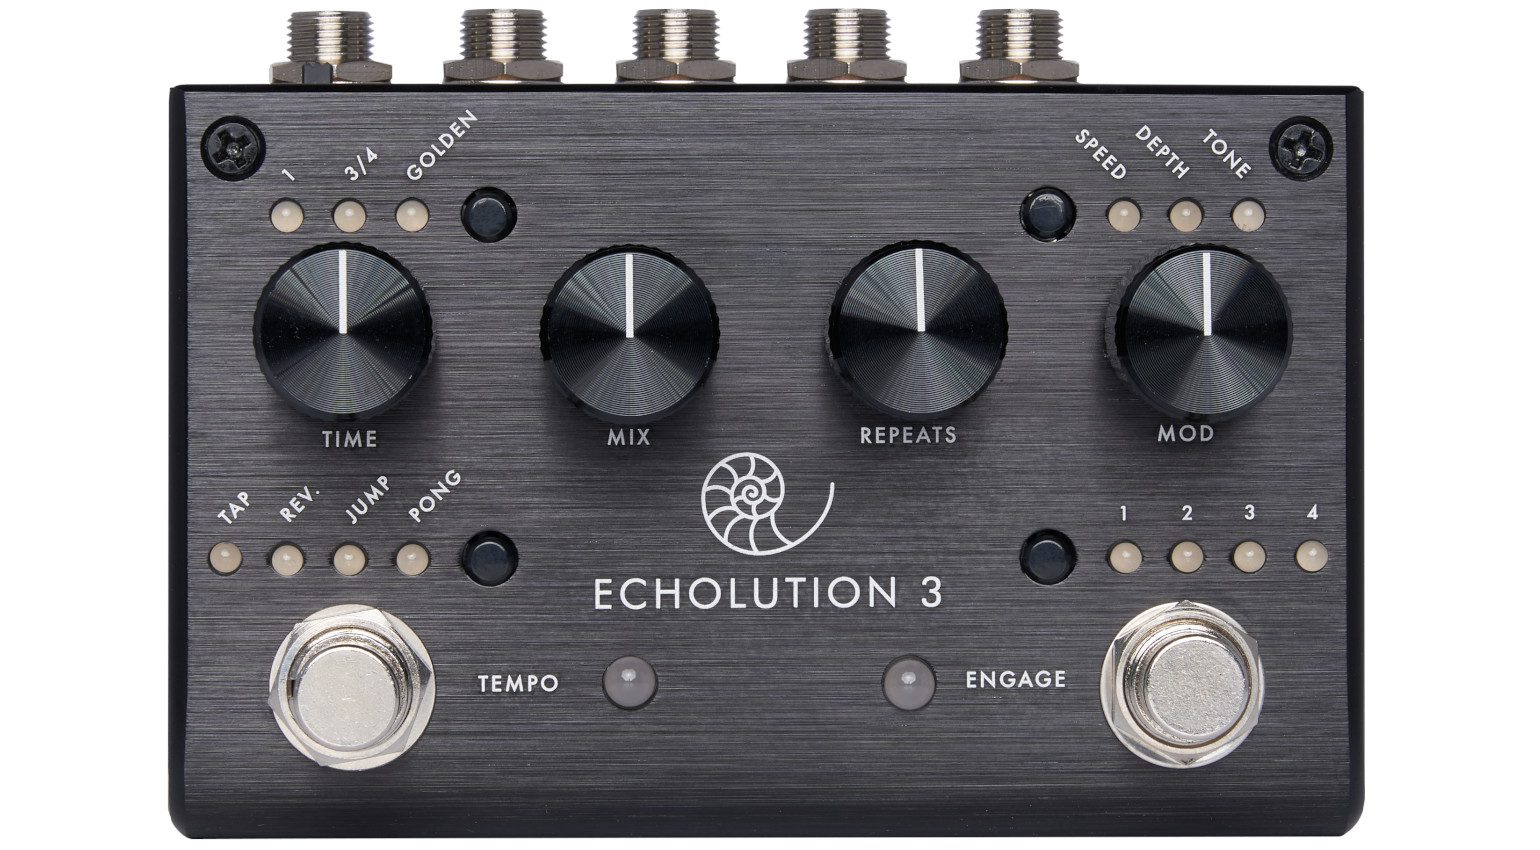 Pigtronix Echolution 3 Stereo Multi-Tap Delay could set new standards